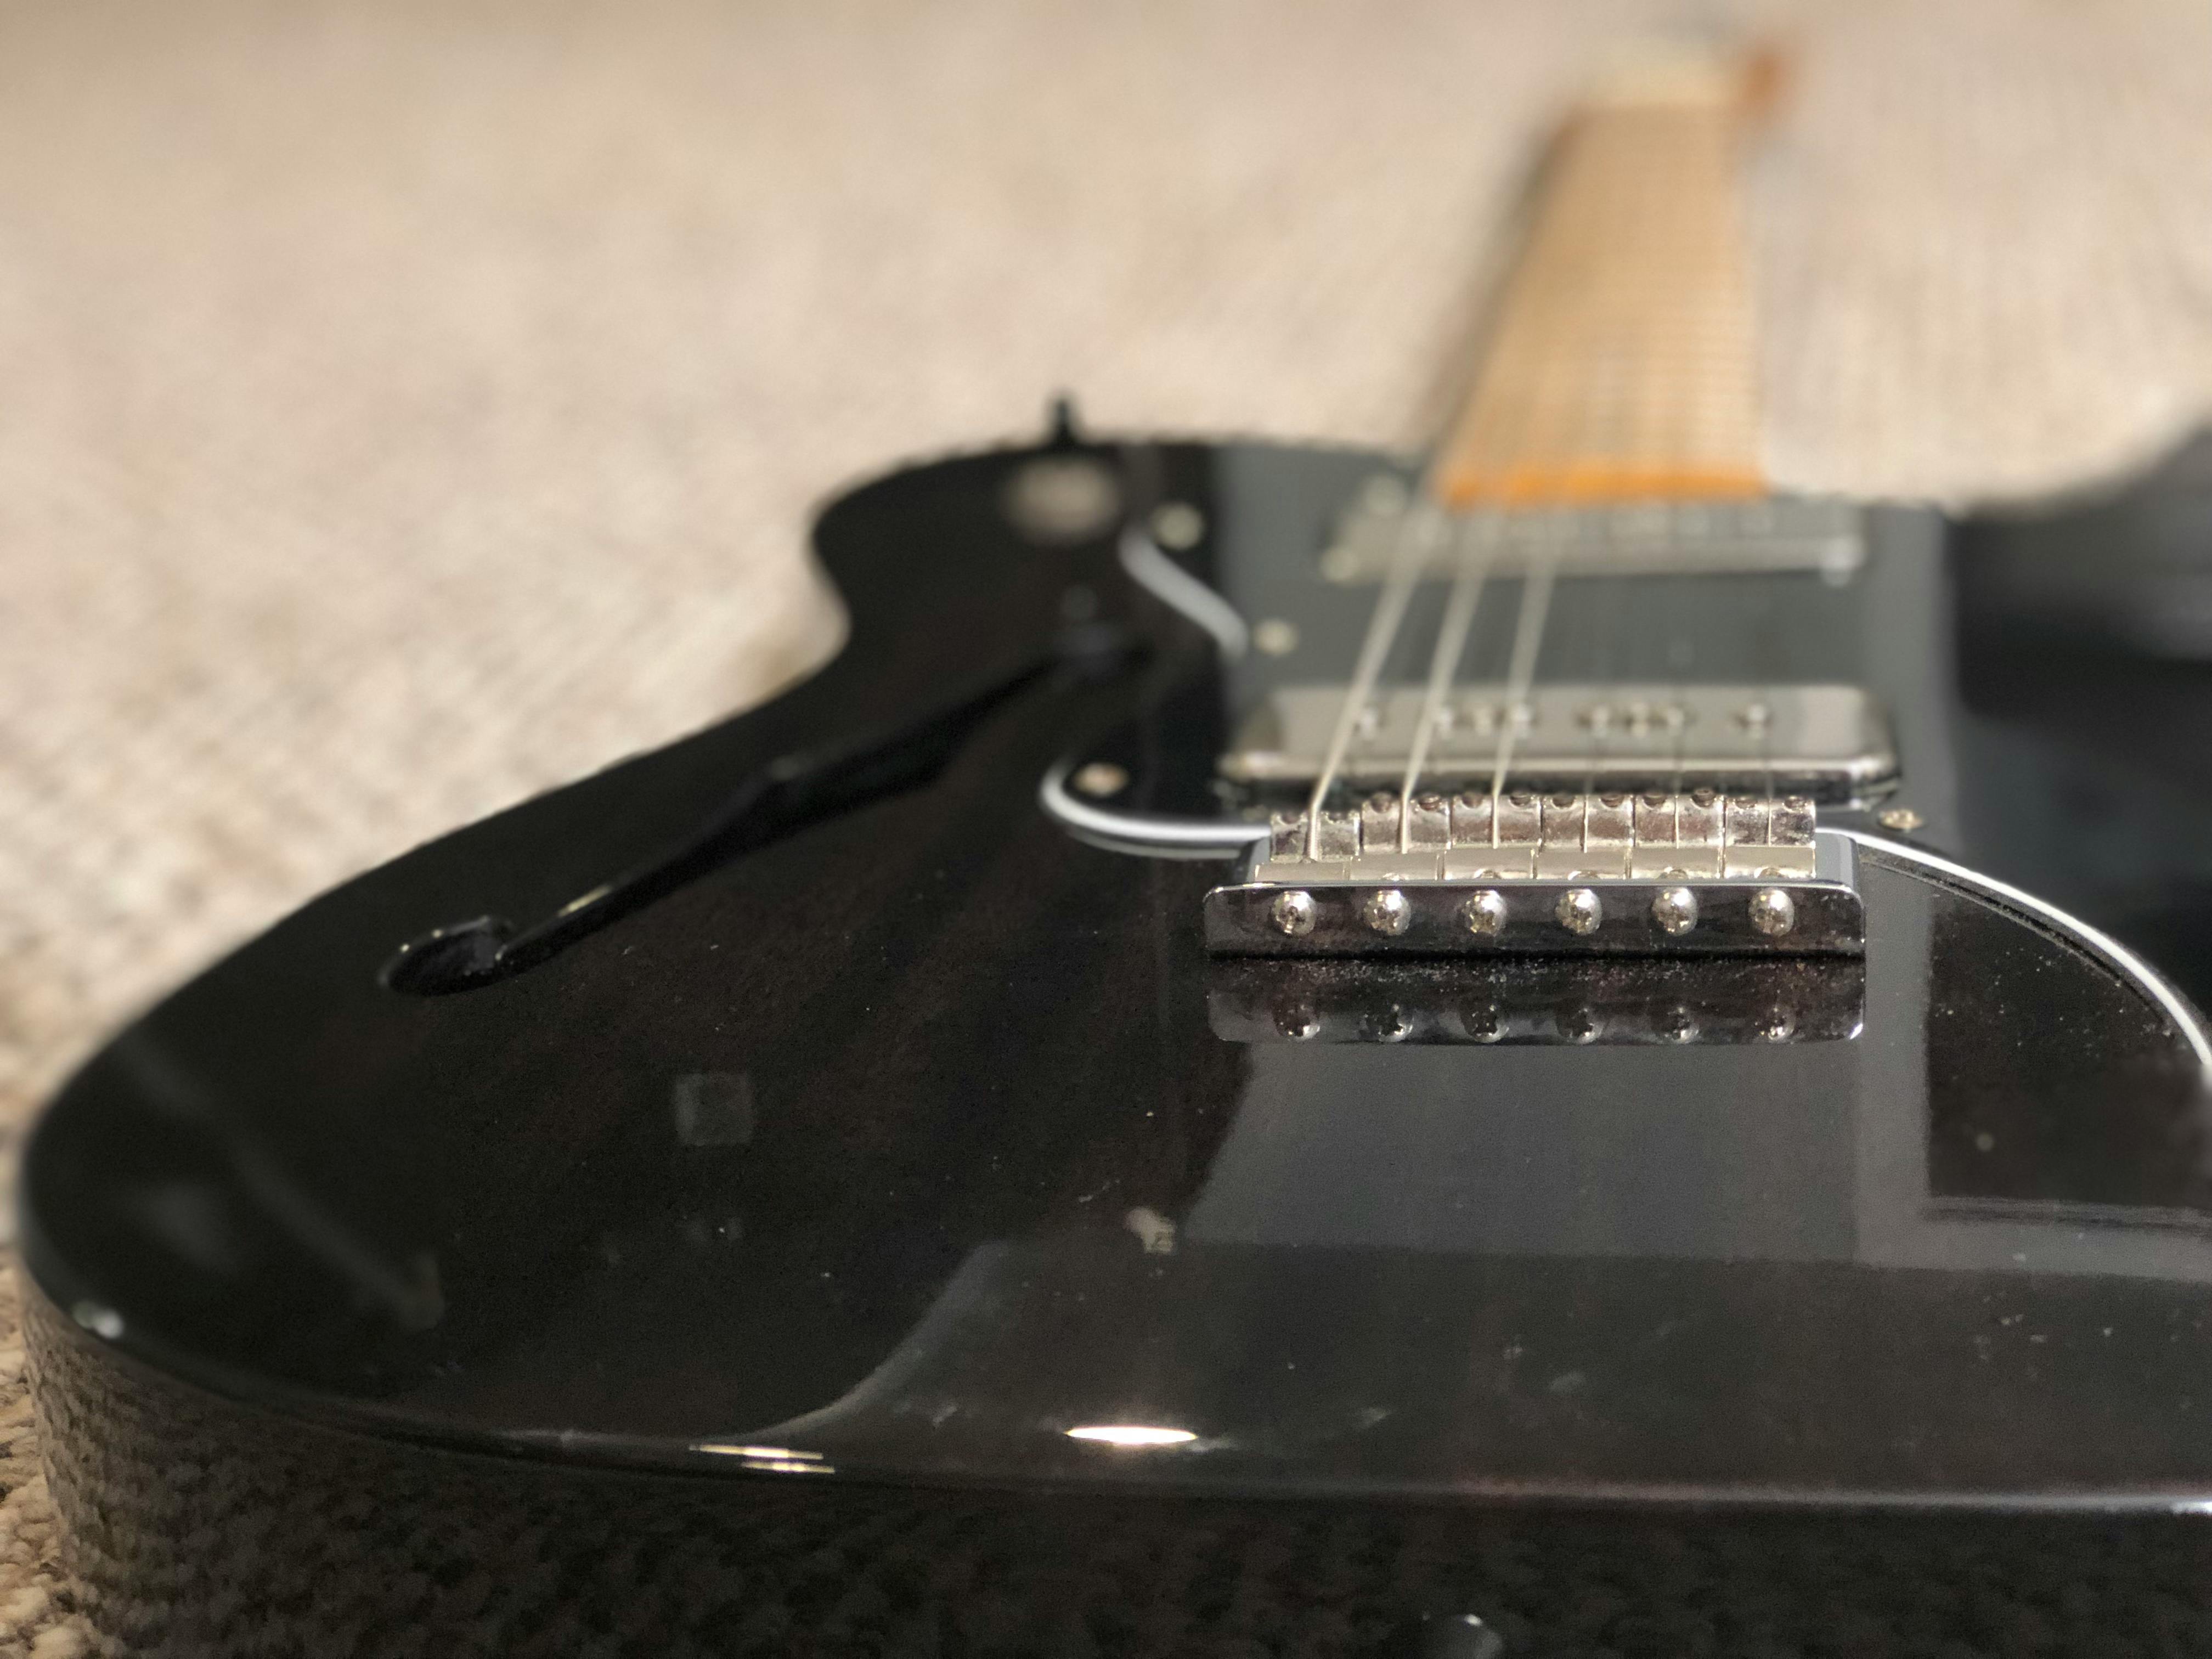 Free stock photo of electric guitar, fender, guitar